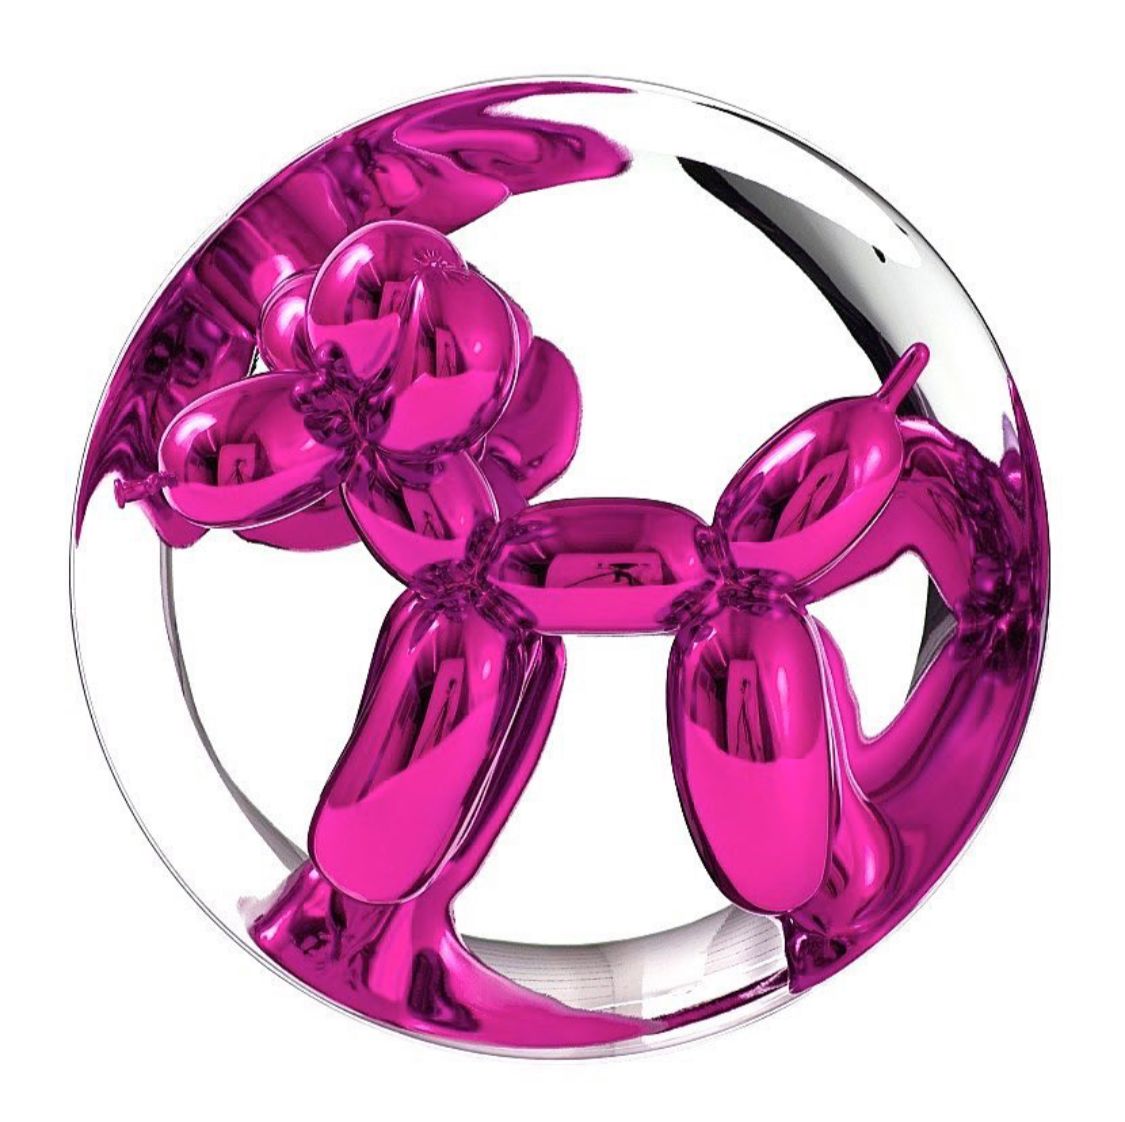 Balloon Dog (Magenta) 2016, Signed / Numbered 1476 Edition Of 2300